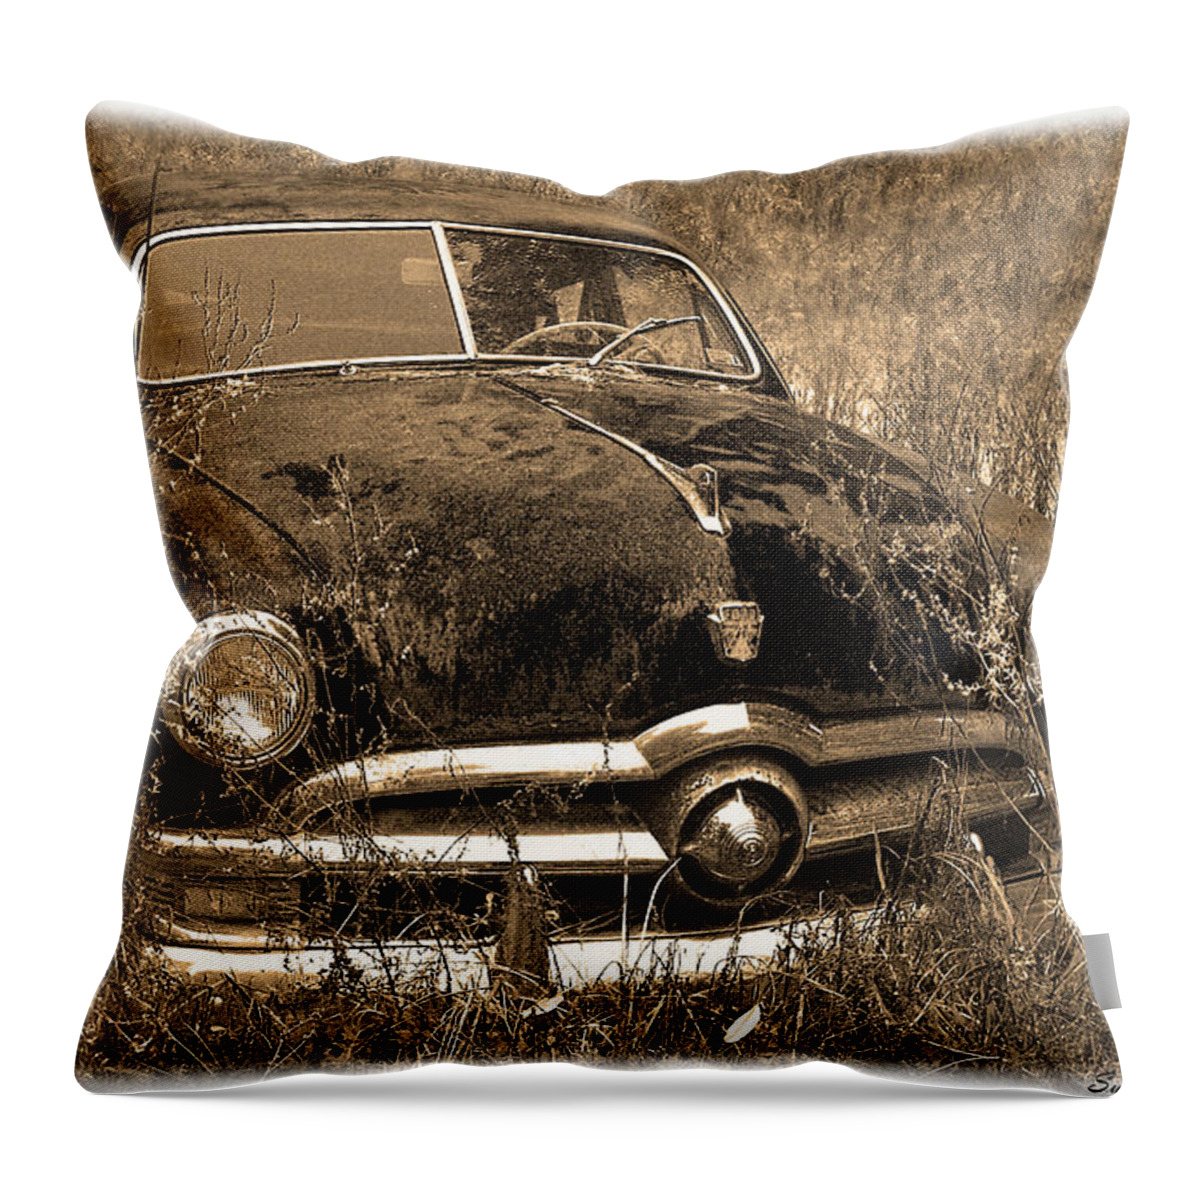 Old Throw Pillow featuring the photograph Old Ford Car 2 by Susan Cliett